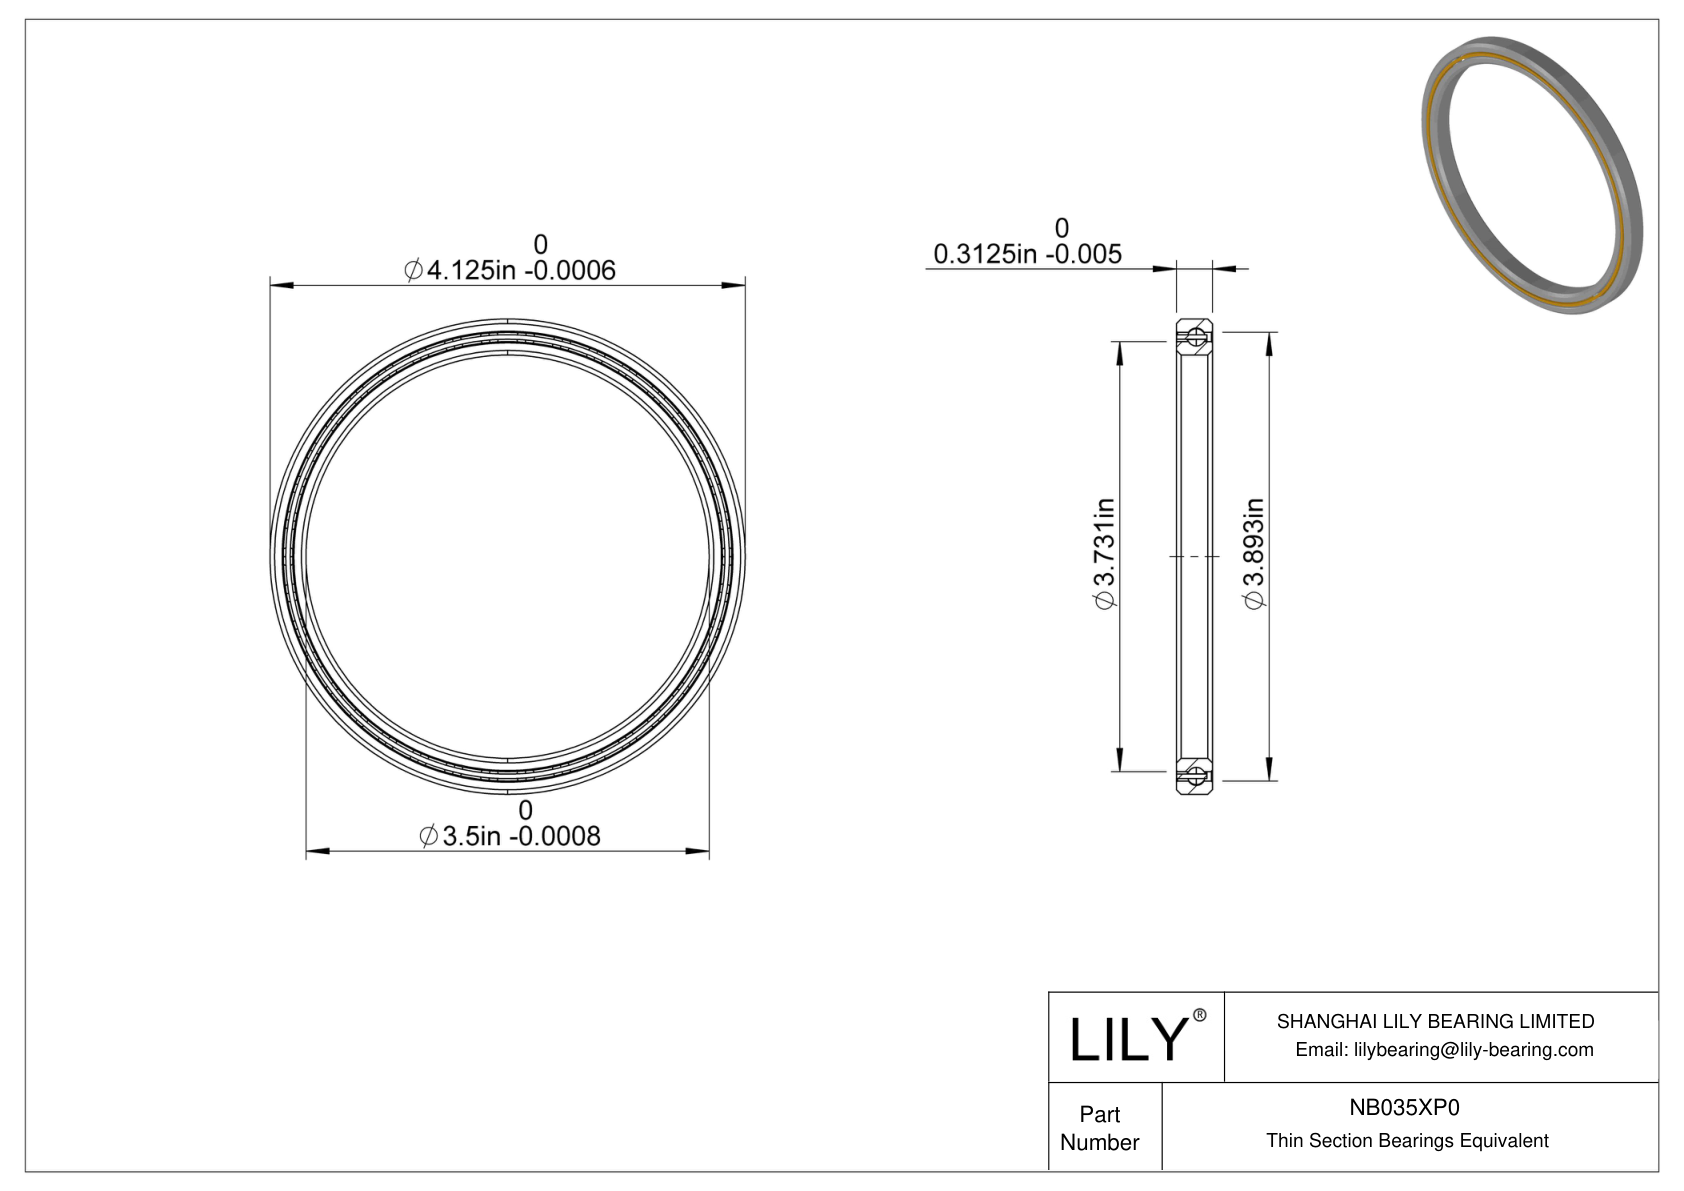 NB035XP0 Constant Section (CS) Bearings cad drawing